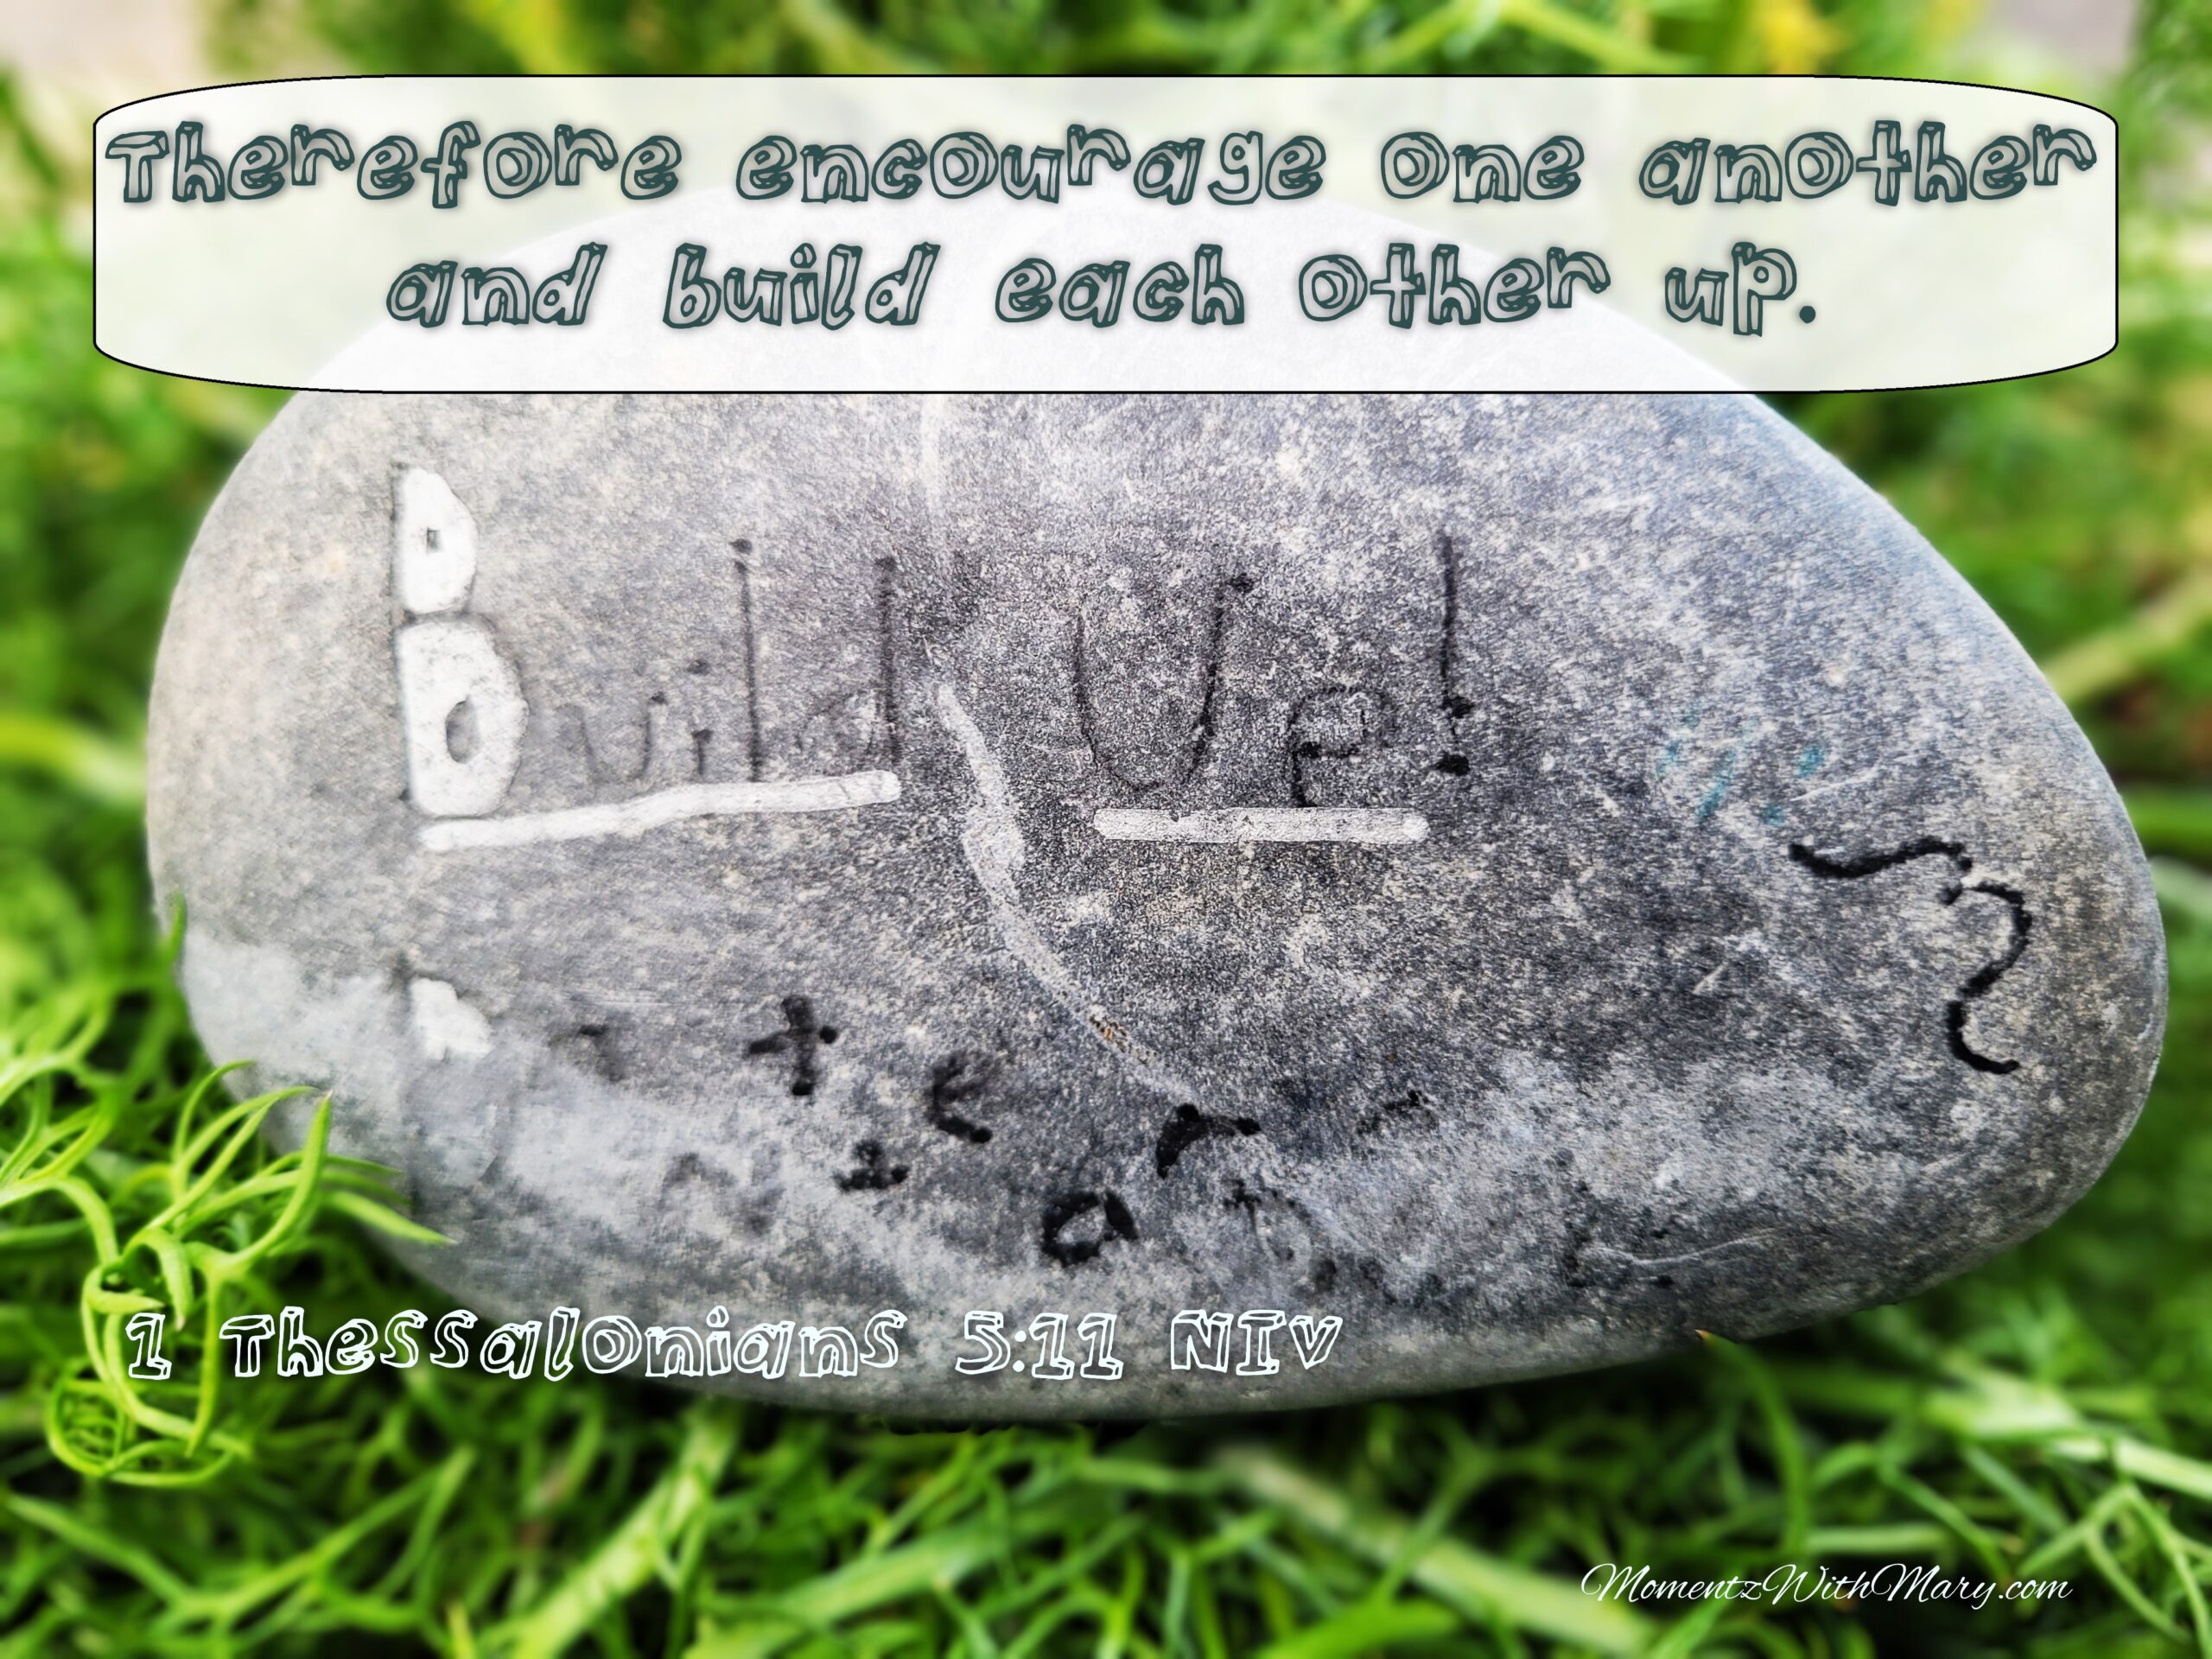 Gray stone on green leaf background. The stone reads Build Up Don't tear down 1 Thessalonians 5:11 New International Version Therefore encourage one another and build each other up